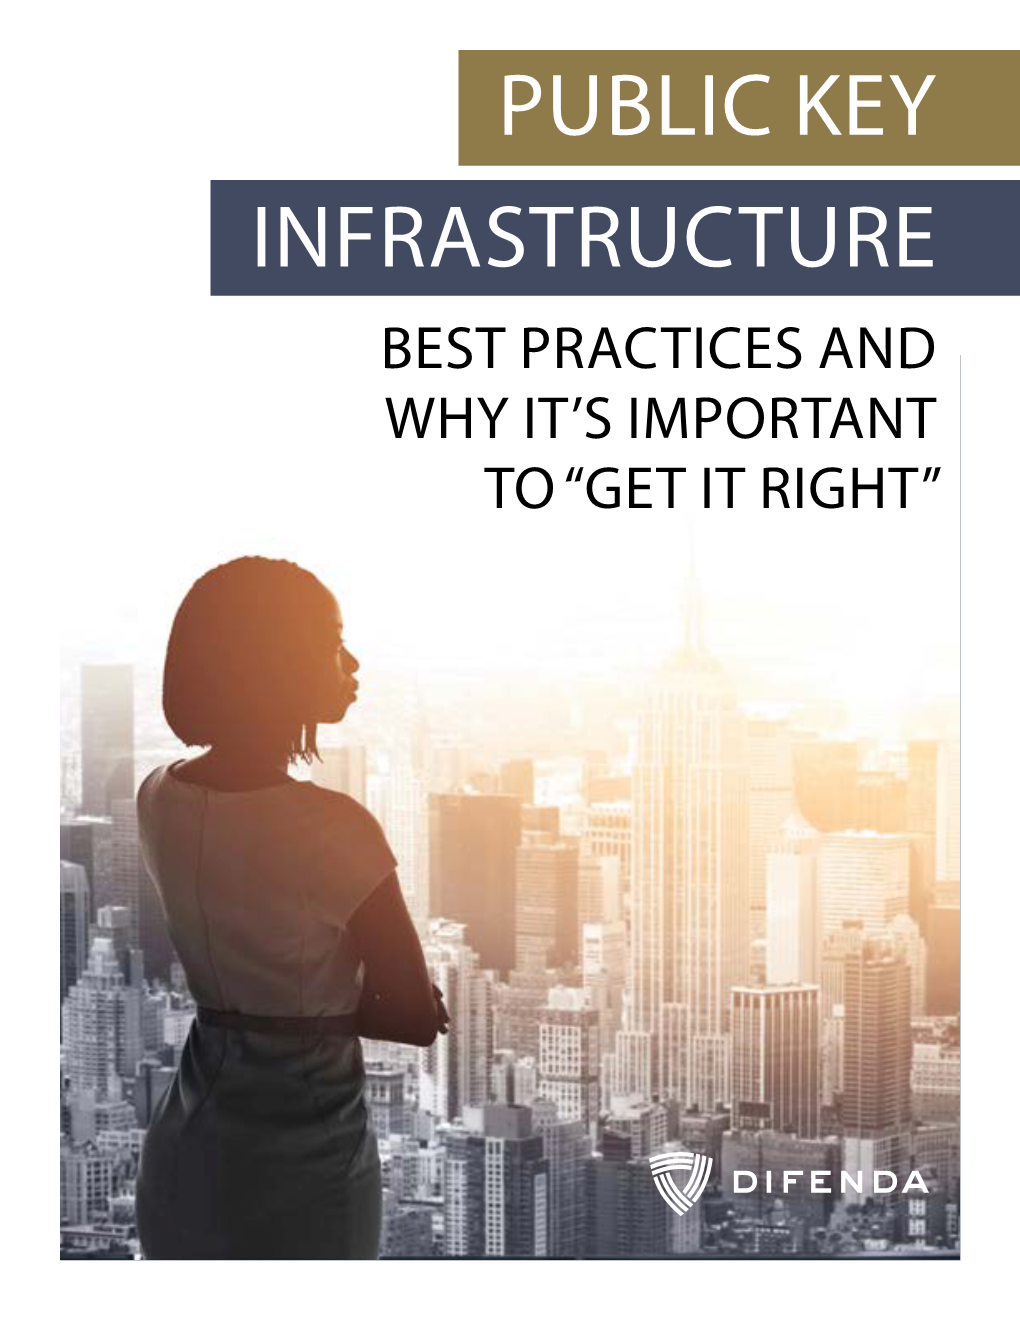 Public Key Infrastructure Best Practices and Why It’S Important to “Get It Right” 2